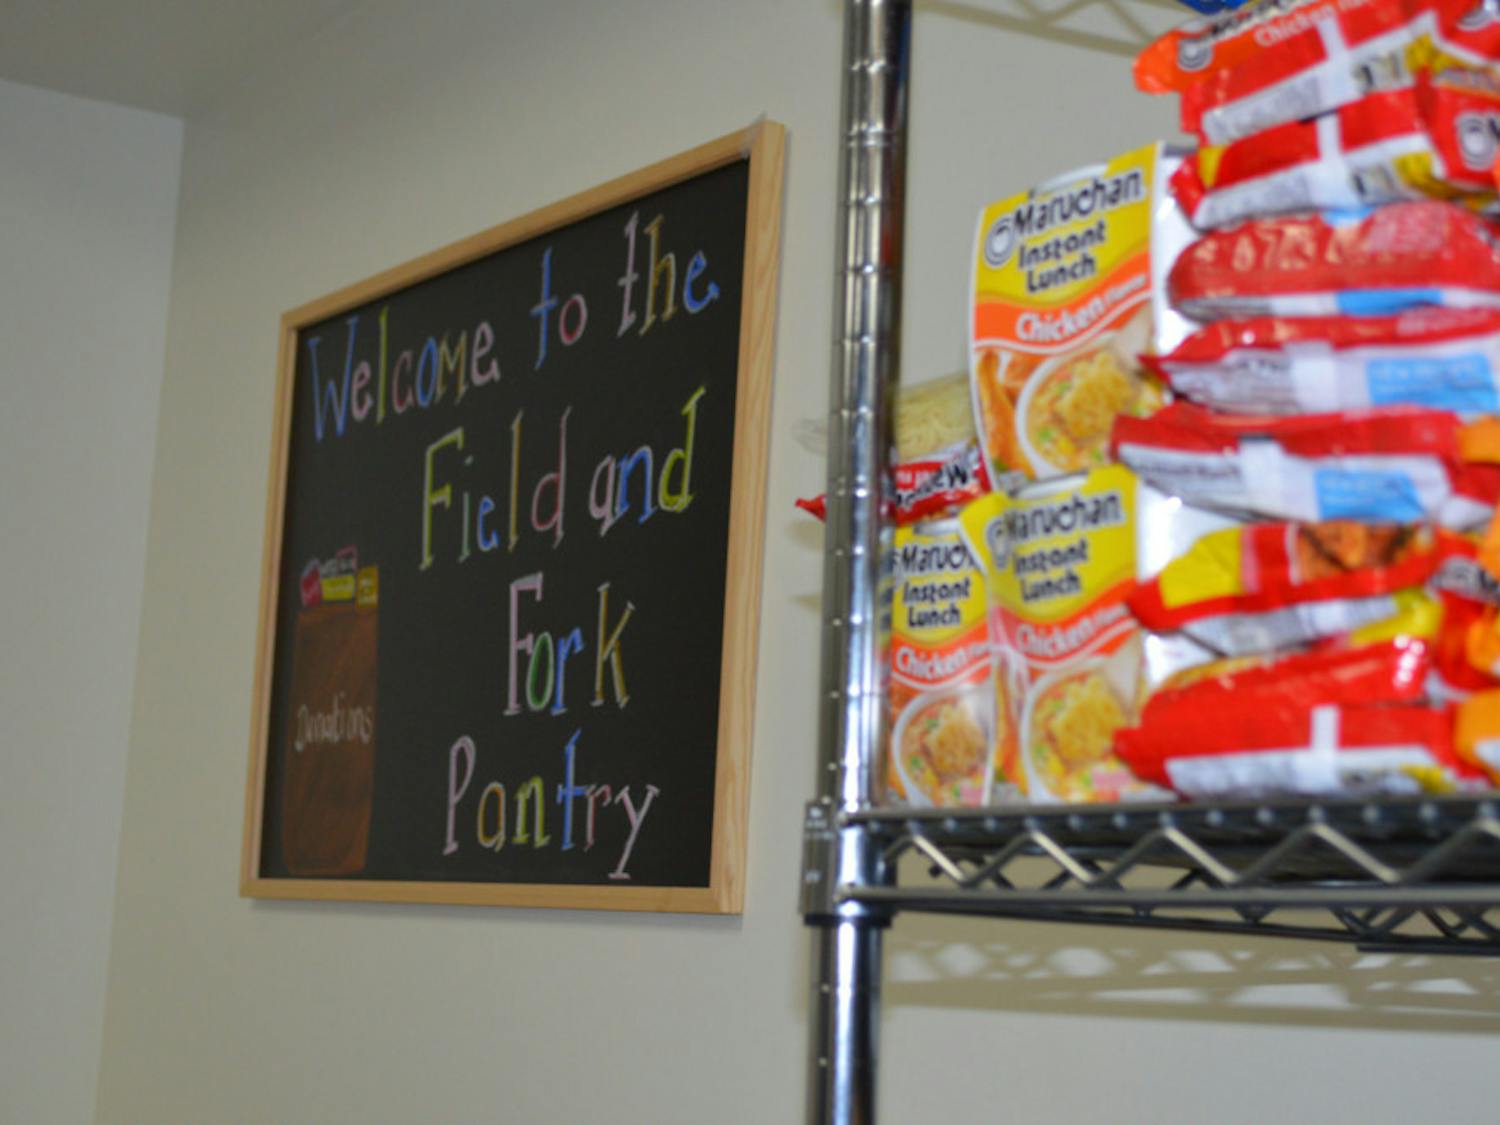 Field and Fork Pantry